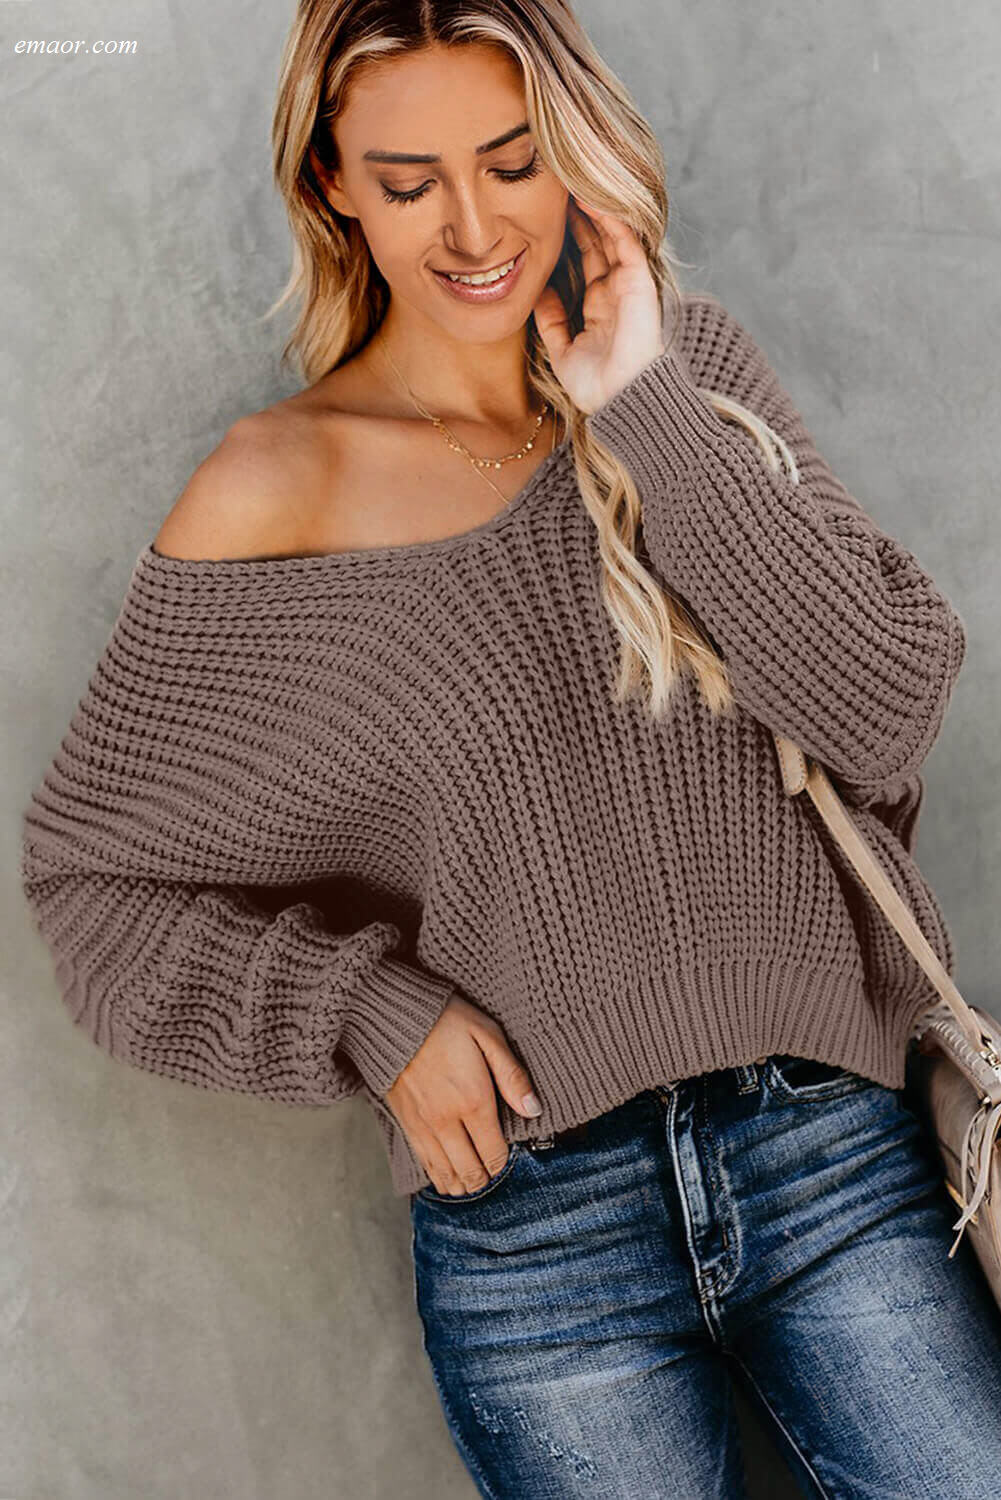 Wholesale Sweaters & Cardigans Haven Outerwear Amazon Knit V Neck Pullover Sweater Hunting Outerwear Reviews